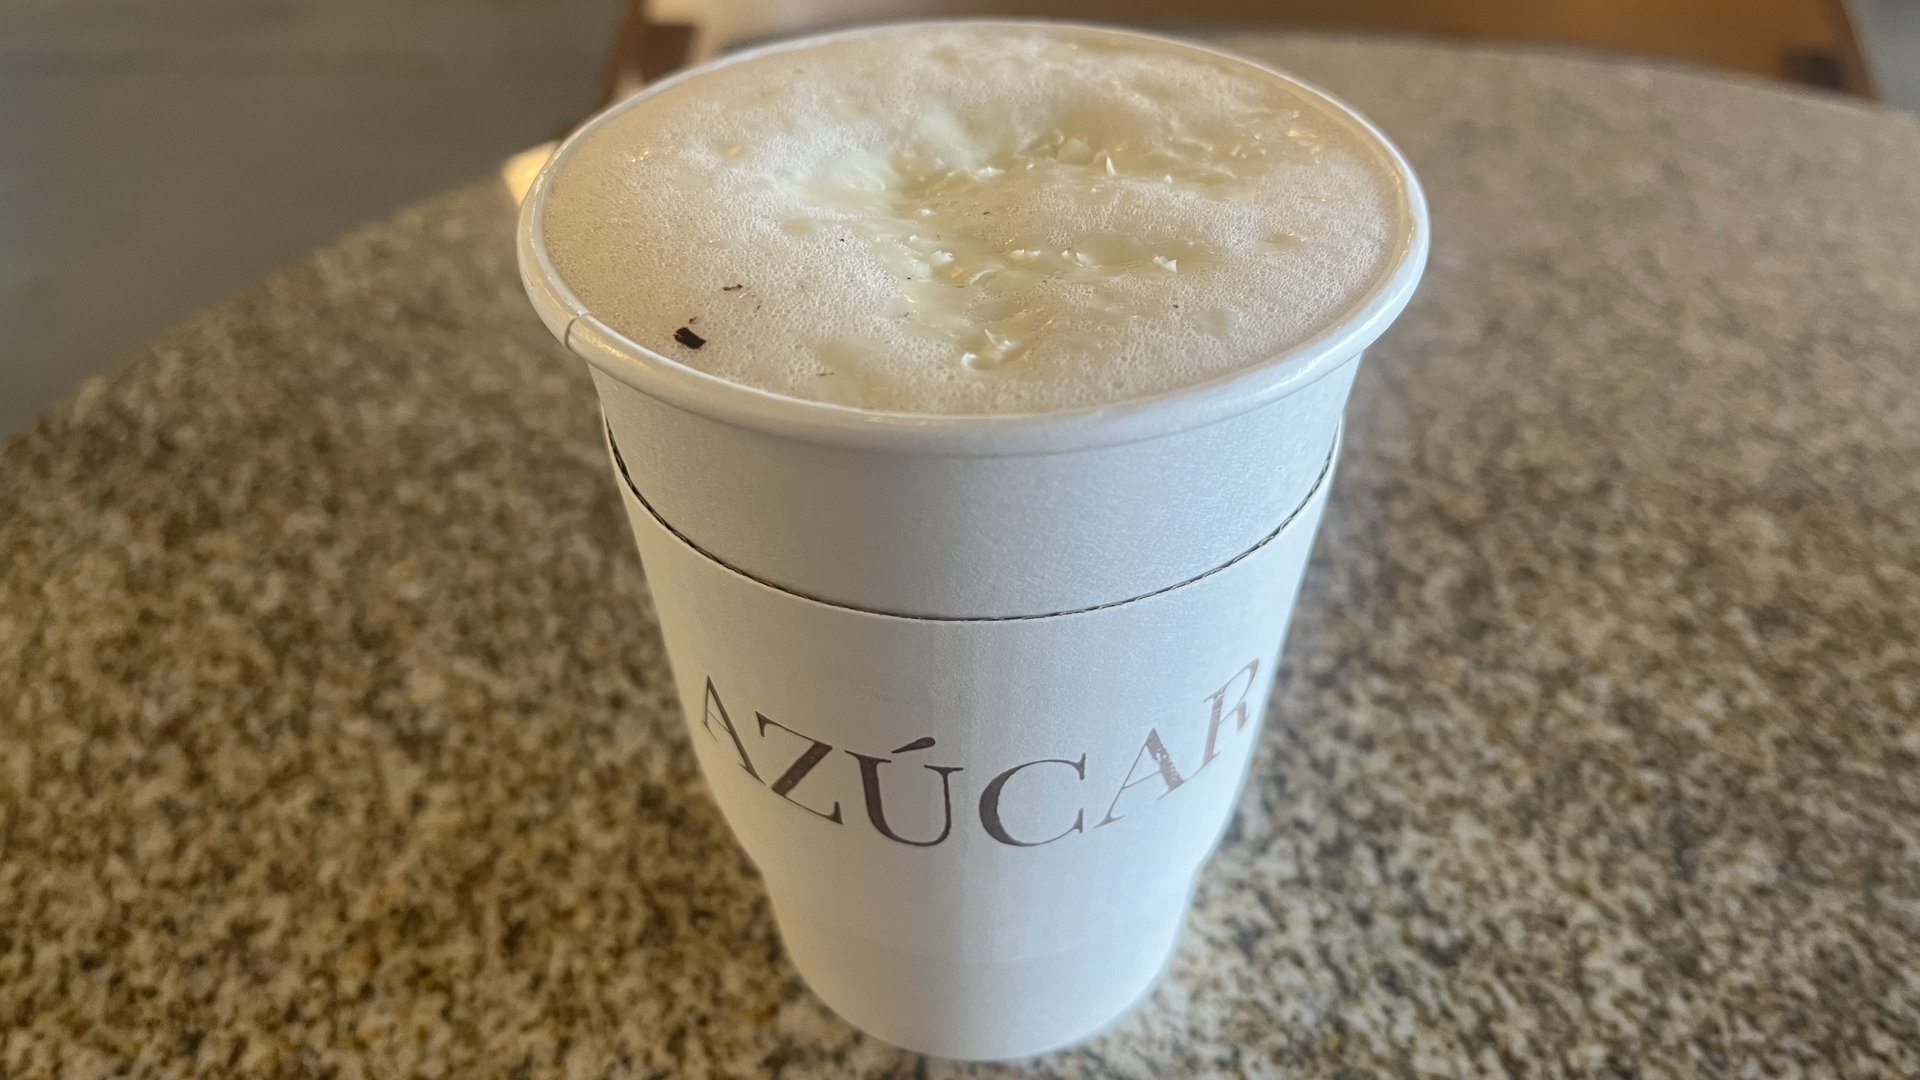 A to-go cup of coffee with "Azúcar" written on the sleeve.